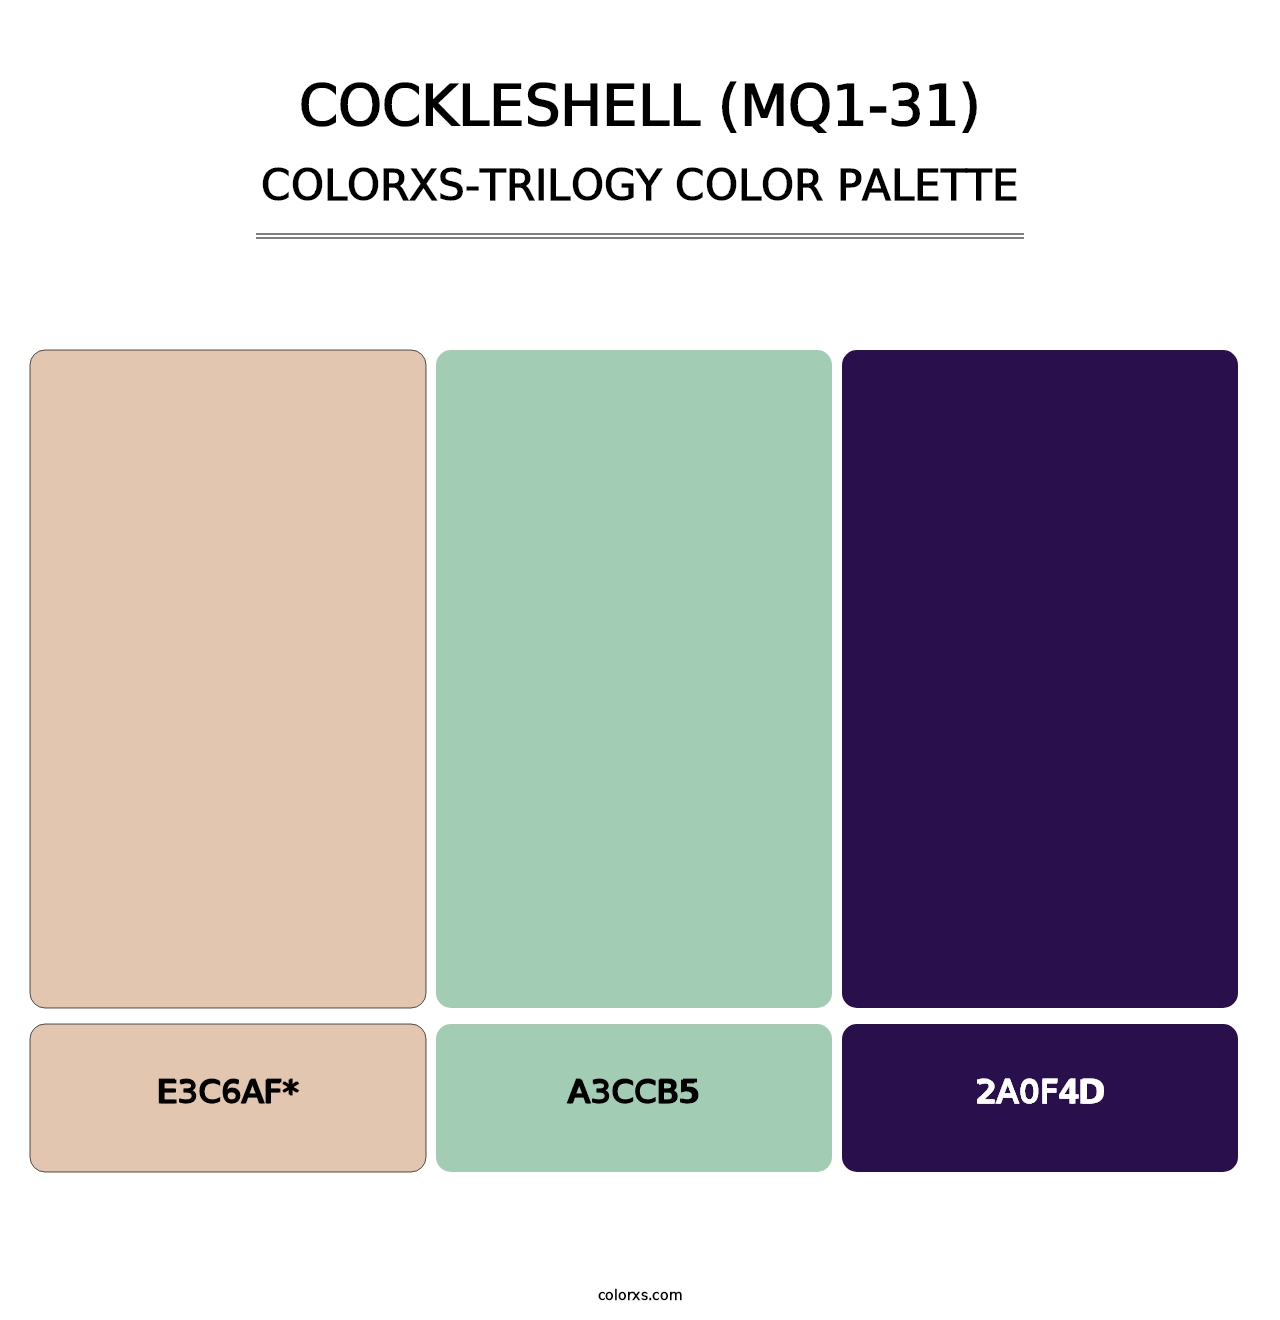 Cockleshell (MQ1-31) - Colorxs Trilogy Palette